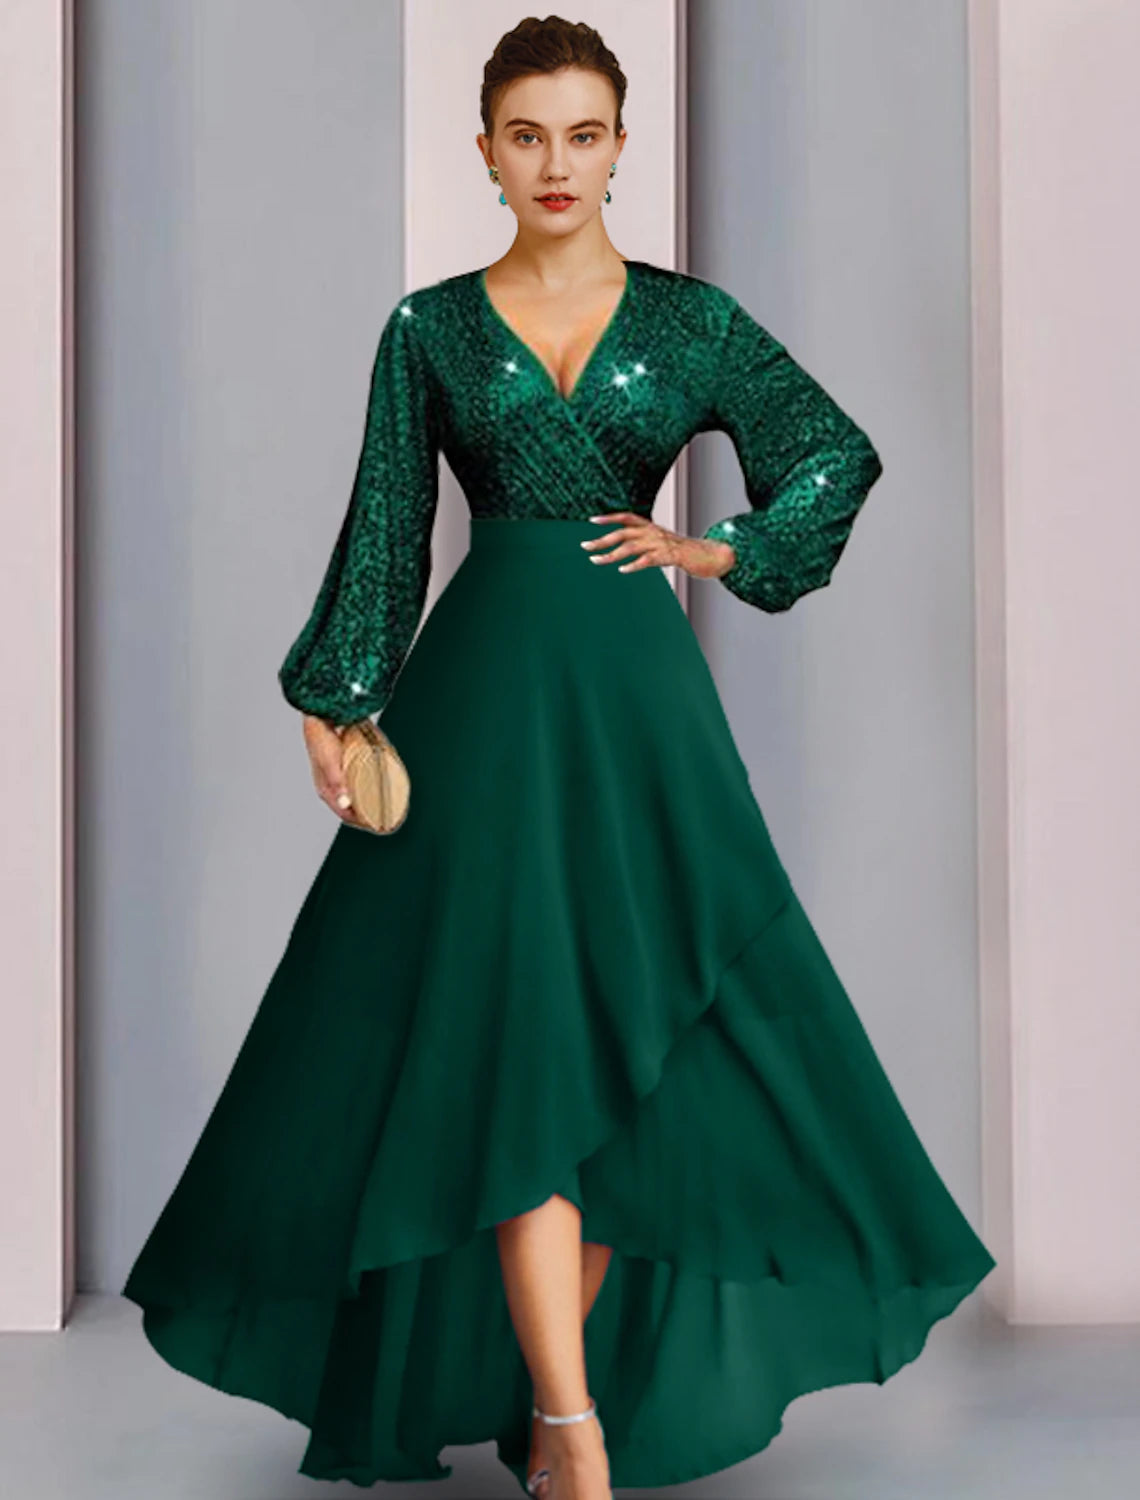 Sheath / Column Mother of the Bride Dress Wedding Guest Elegant Sparkle & Shine V Neck Asymmetrical Chiffon Sequined Long Sleeve with Pleats Solid Color